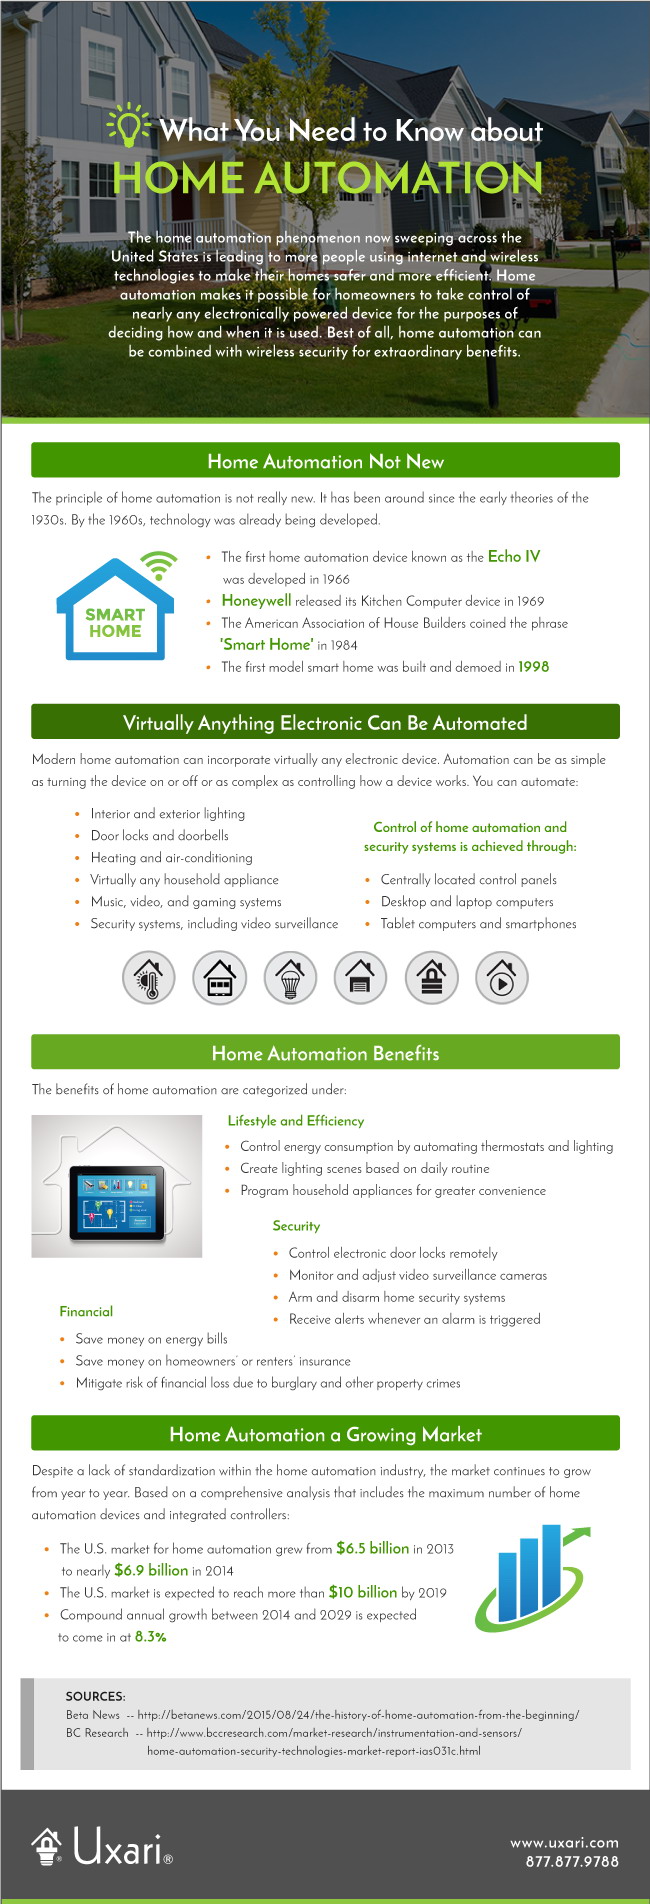 What You Need to Know About Home Automation